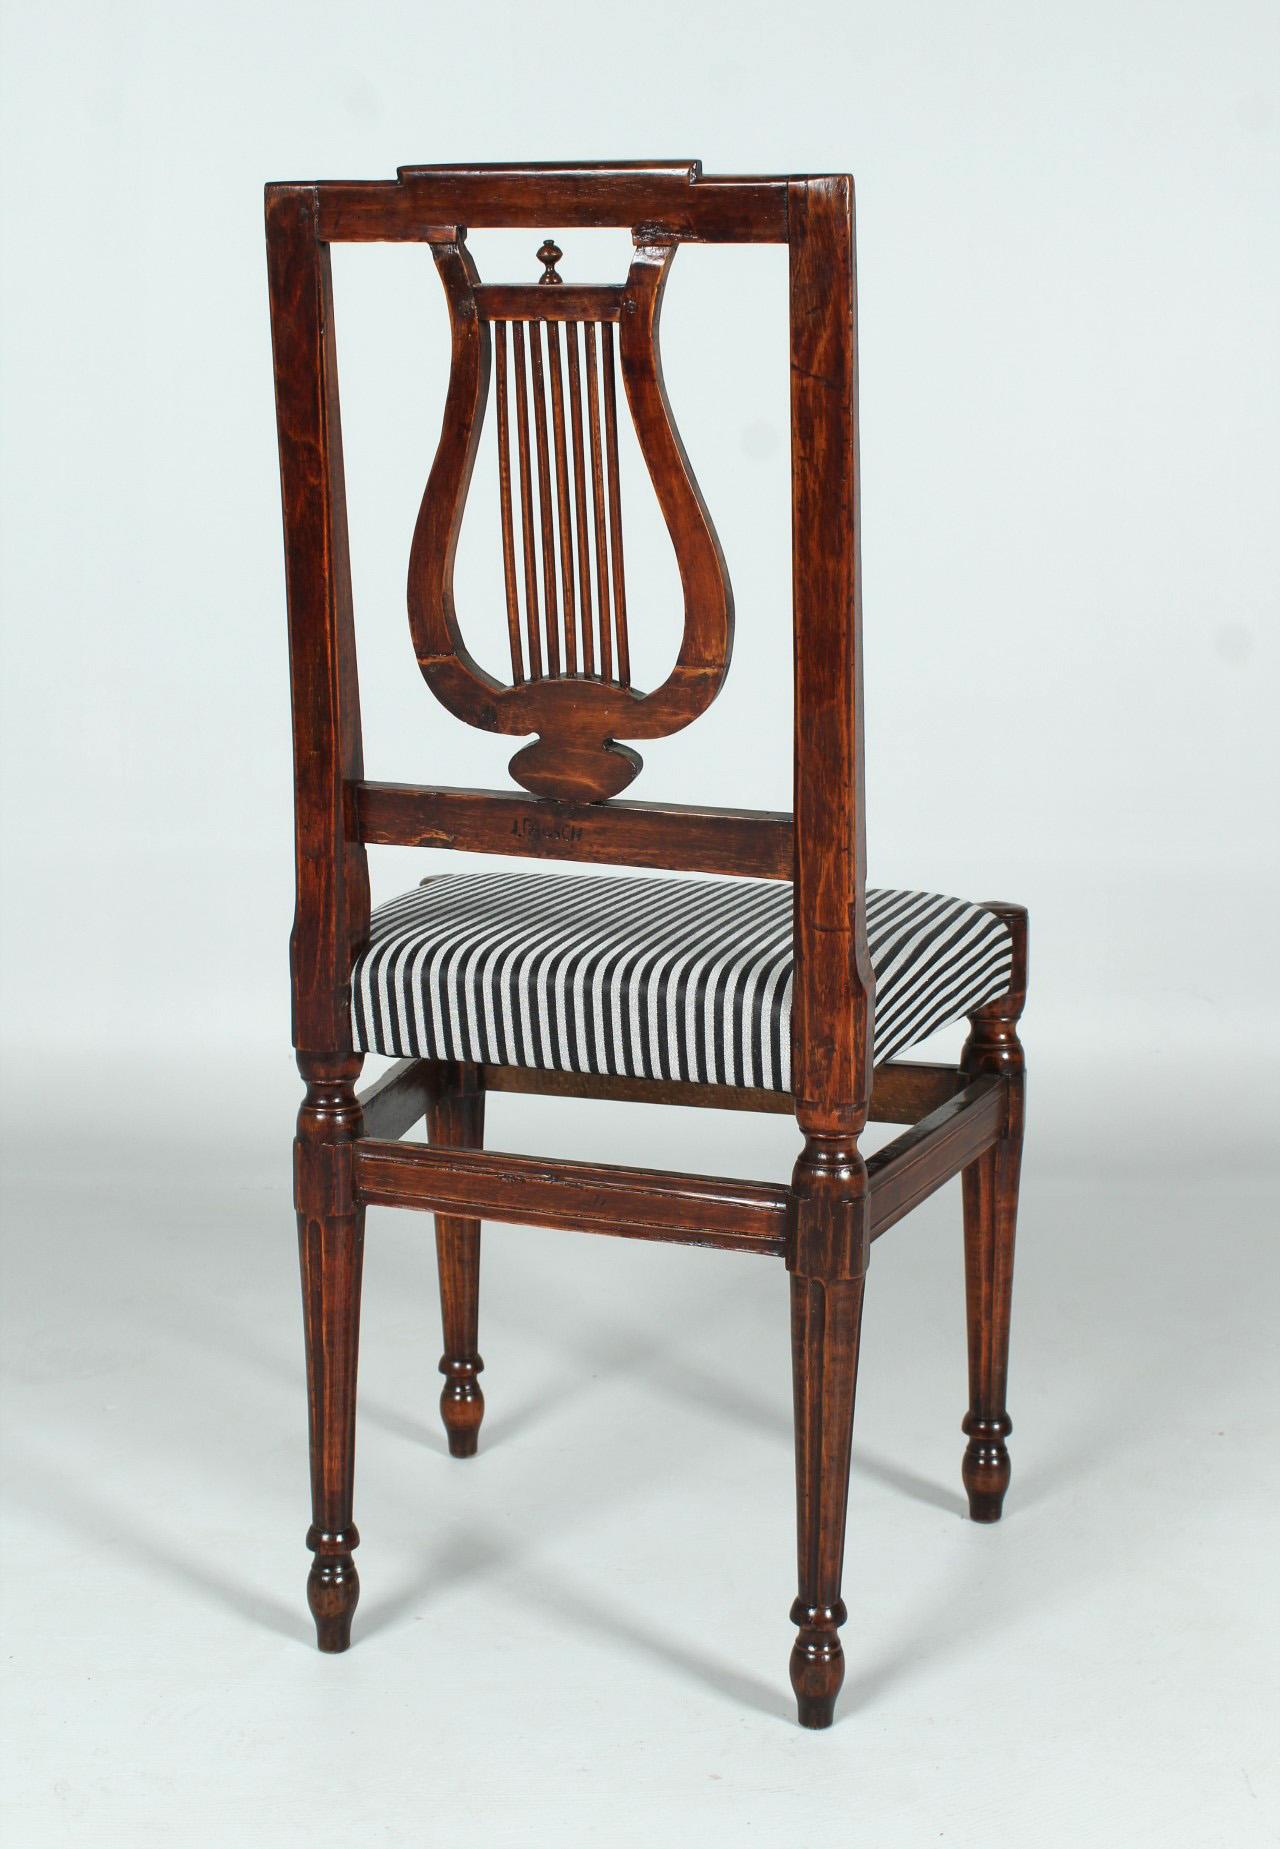 French Early 19th Century Lyre-Chair For Sale